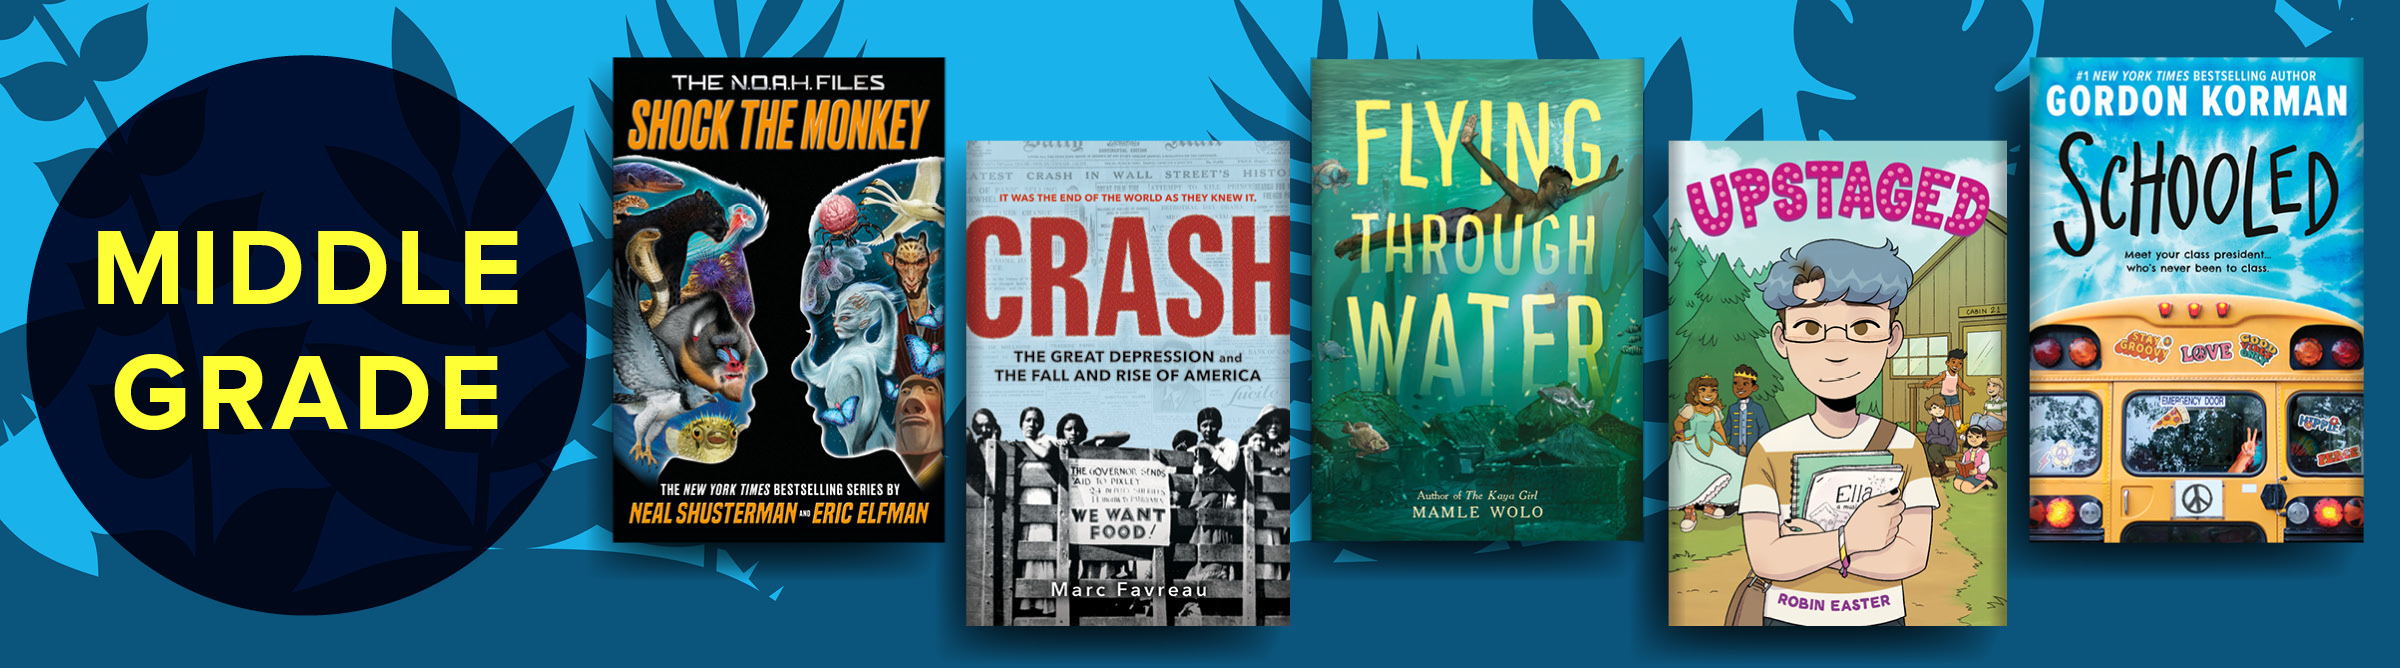 Middle Grade banner with images of book covers for 'Shock The Monkey,' 'Crash,' 'Flying Through Water,' and 'Upstaged,' 'Schooled'